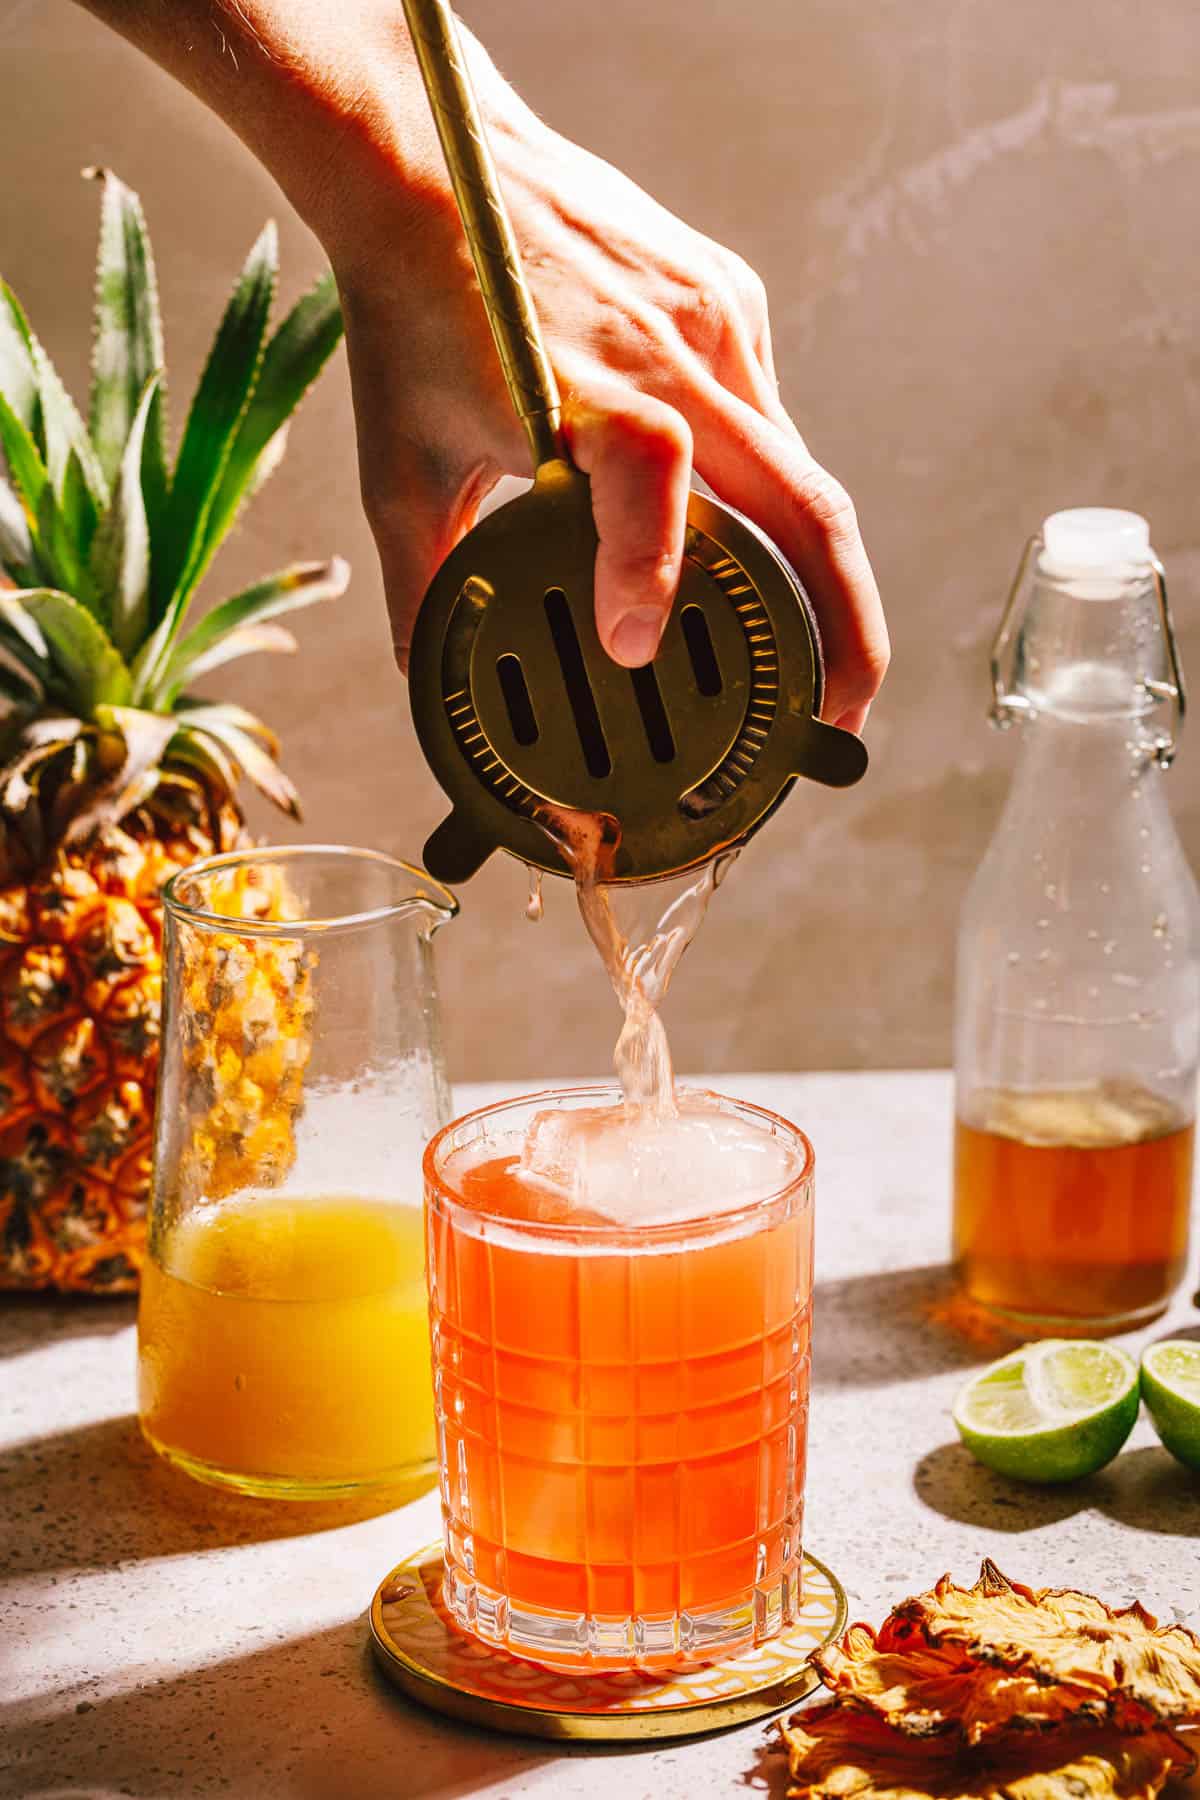 A jungle bird cocktail being strained into a glass with ice with pineapples, limes and juices in the background.